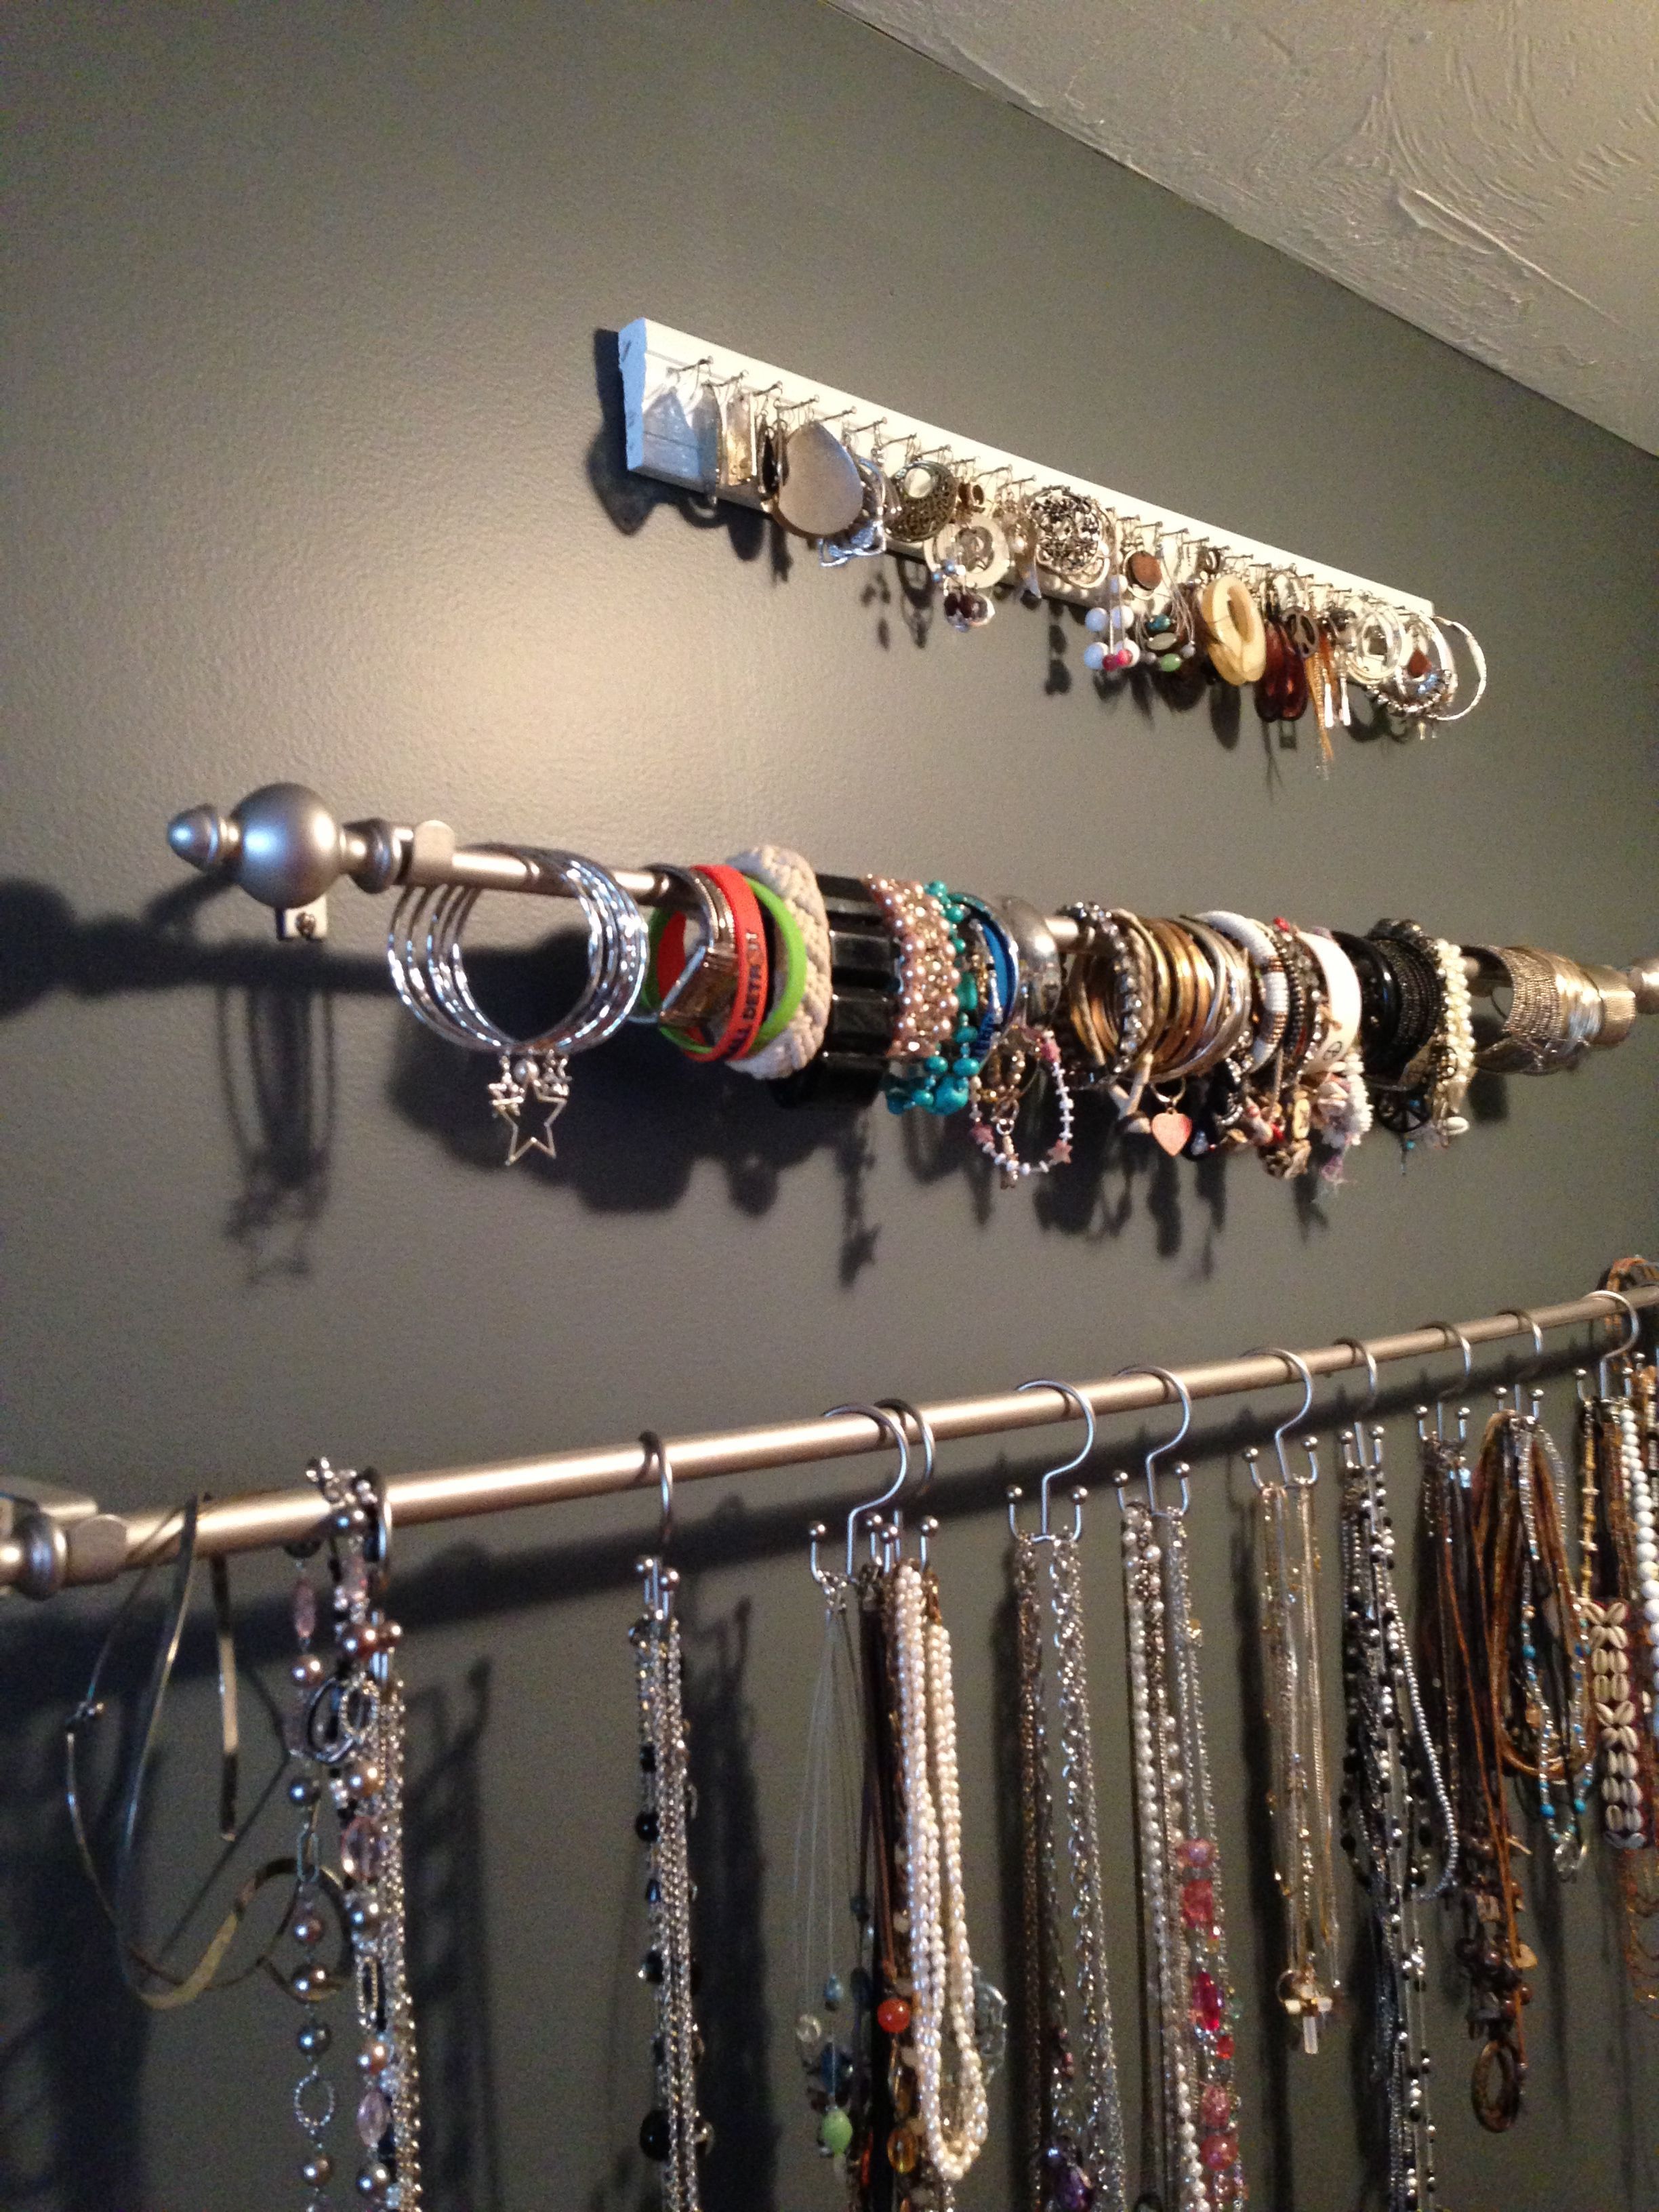 Great way to save space and still see all of your jewelry! I need this in my apartment…